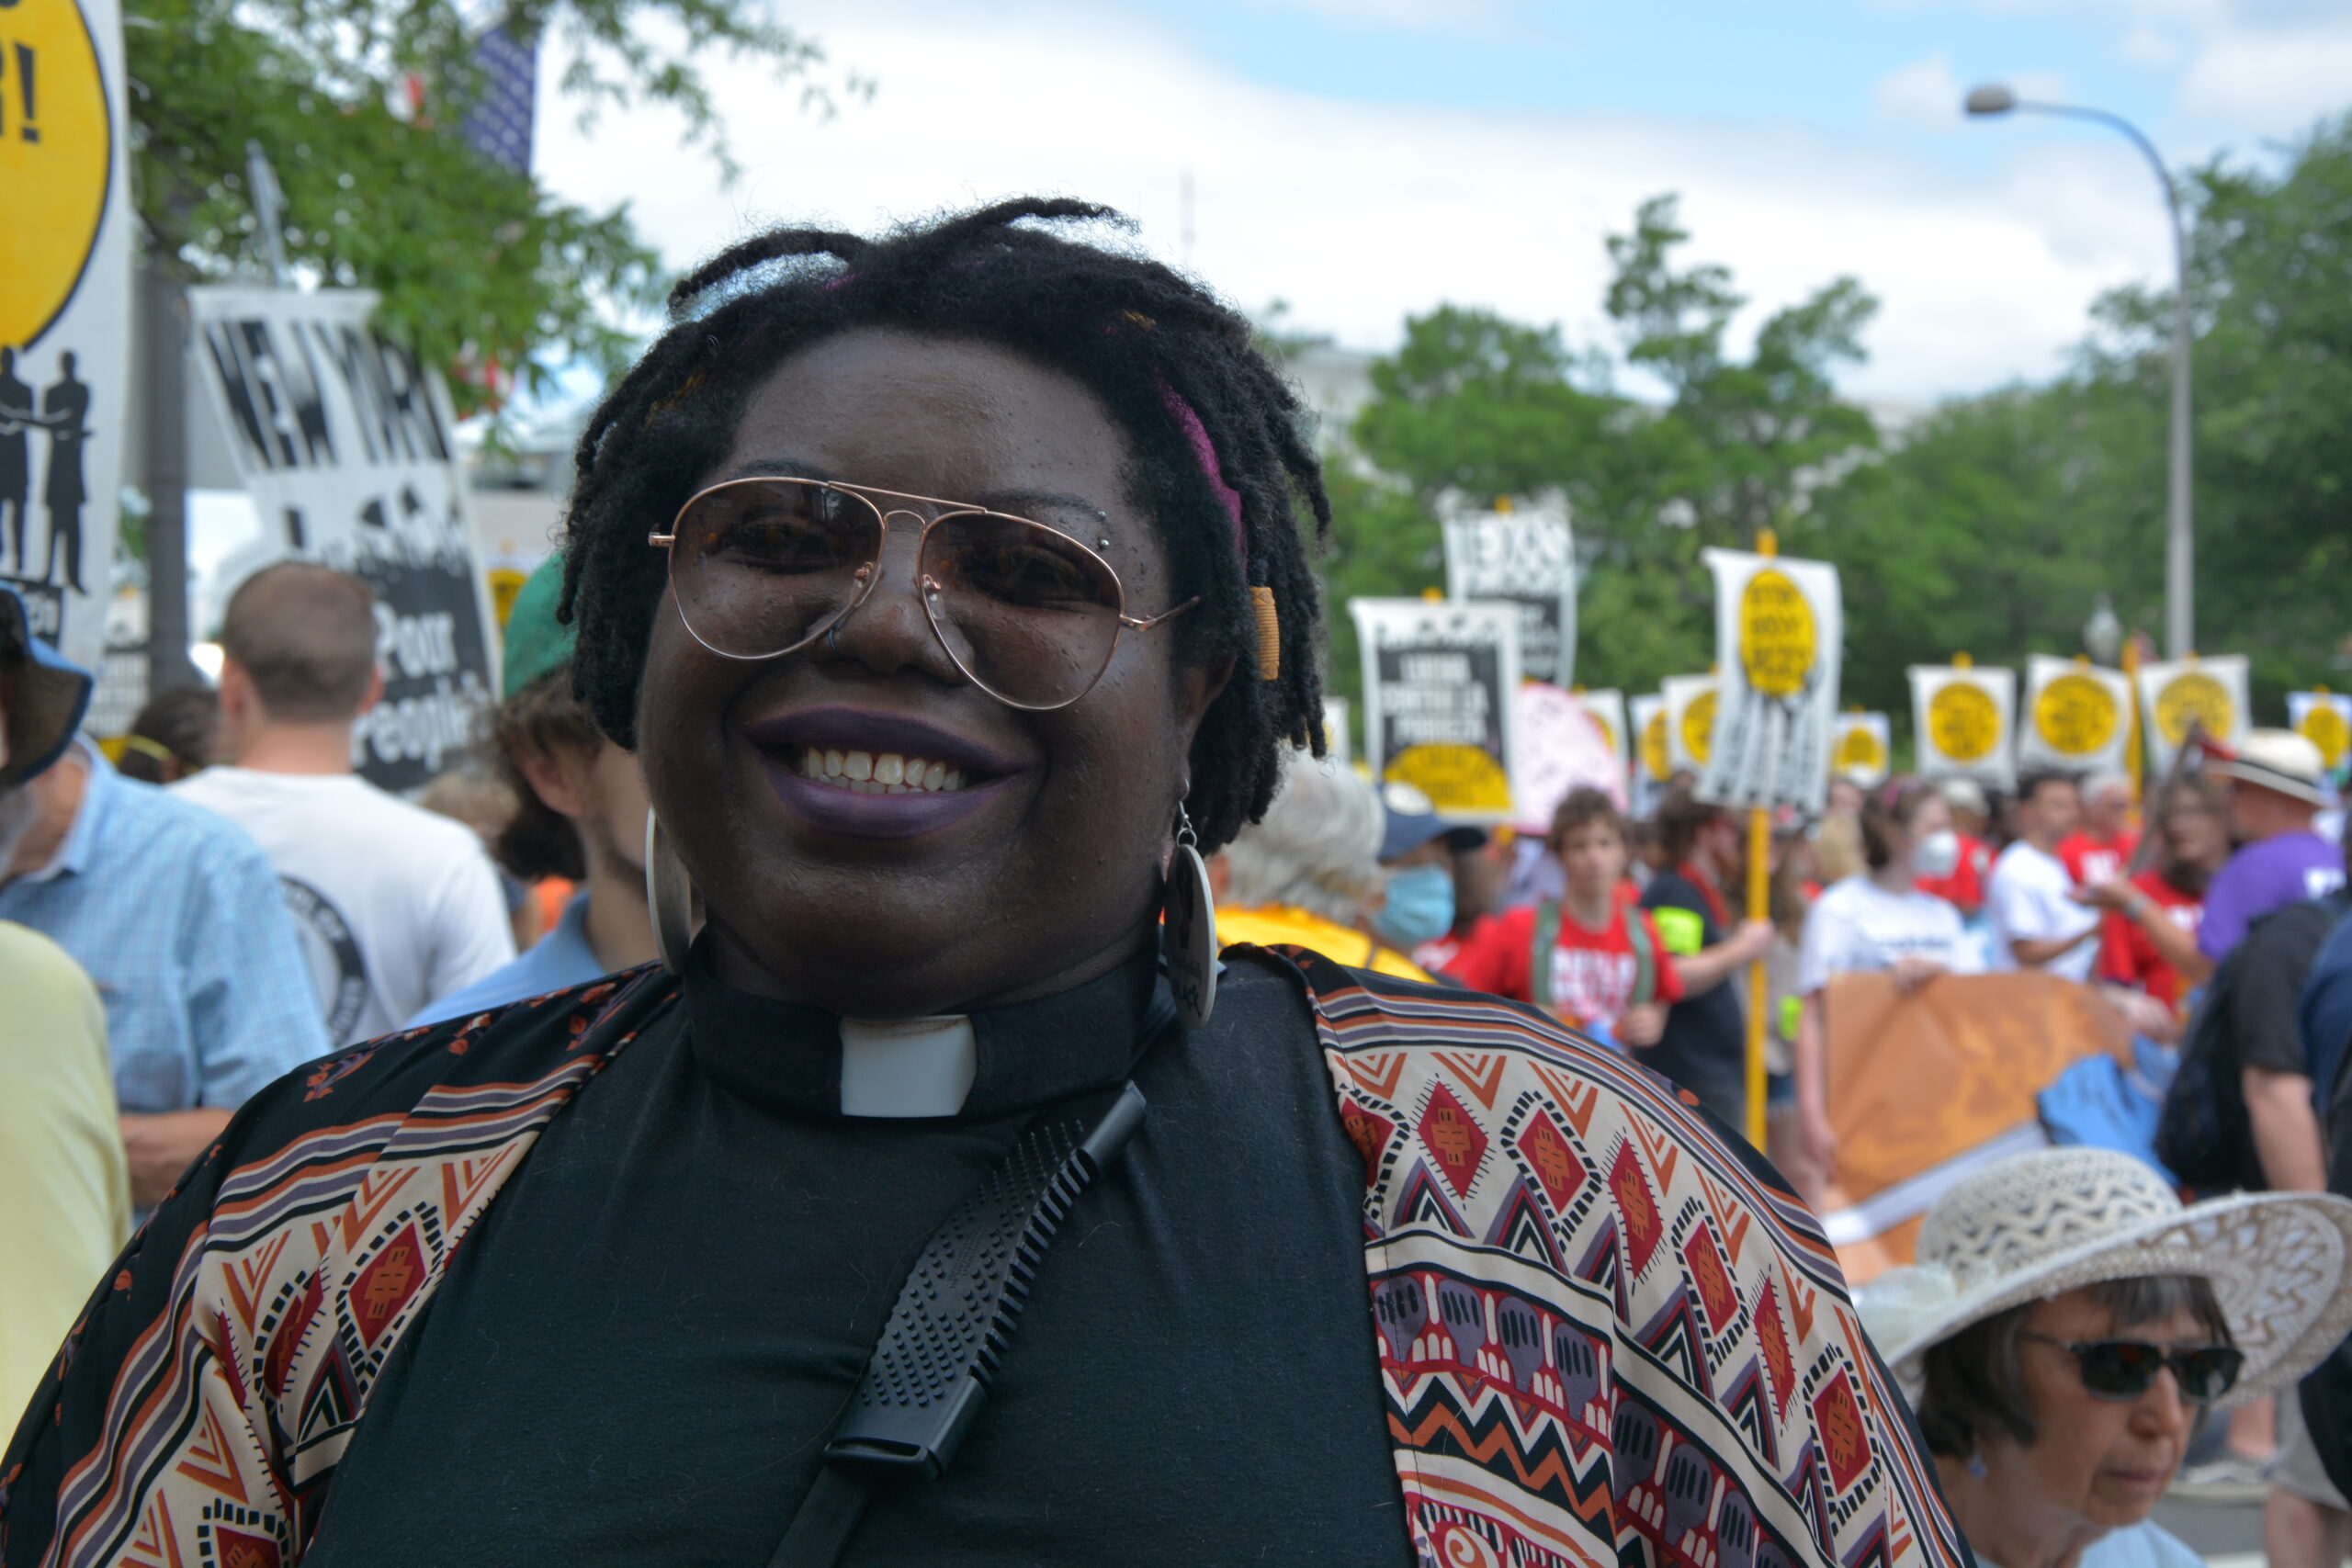 The Rev. Amanda Weatherspoon, a Unitarian Universalist minister, attends the Poor People's Campaign's "Mass Poor People’s and Low-Wage Workers’ Assembly and Moral March in Washington" on June 18, 2022.